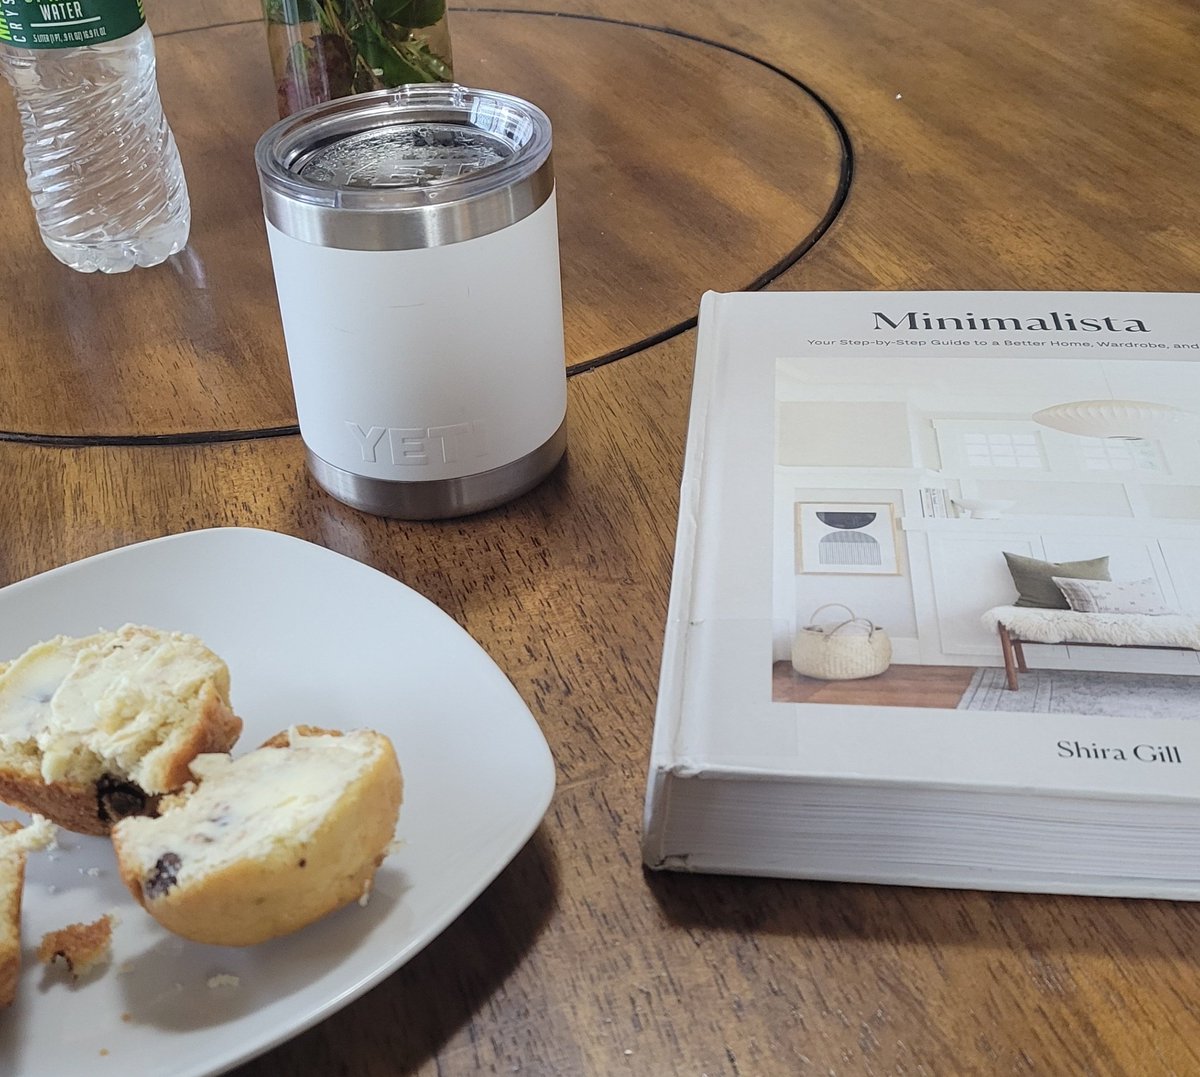 It's the last 2 Mondays of summer: Quiet mornings of coffee, homemade muffins, and personal reading. 

#backtoschool #ELAteacher #minimalista #Summer #personalreading